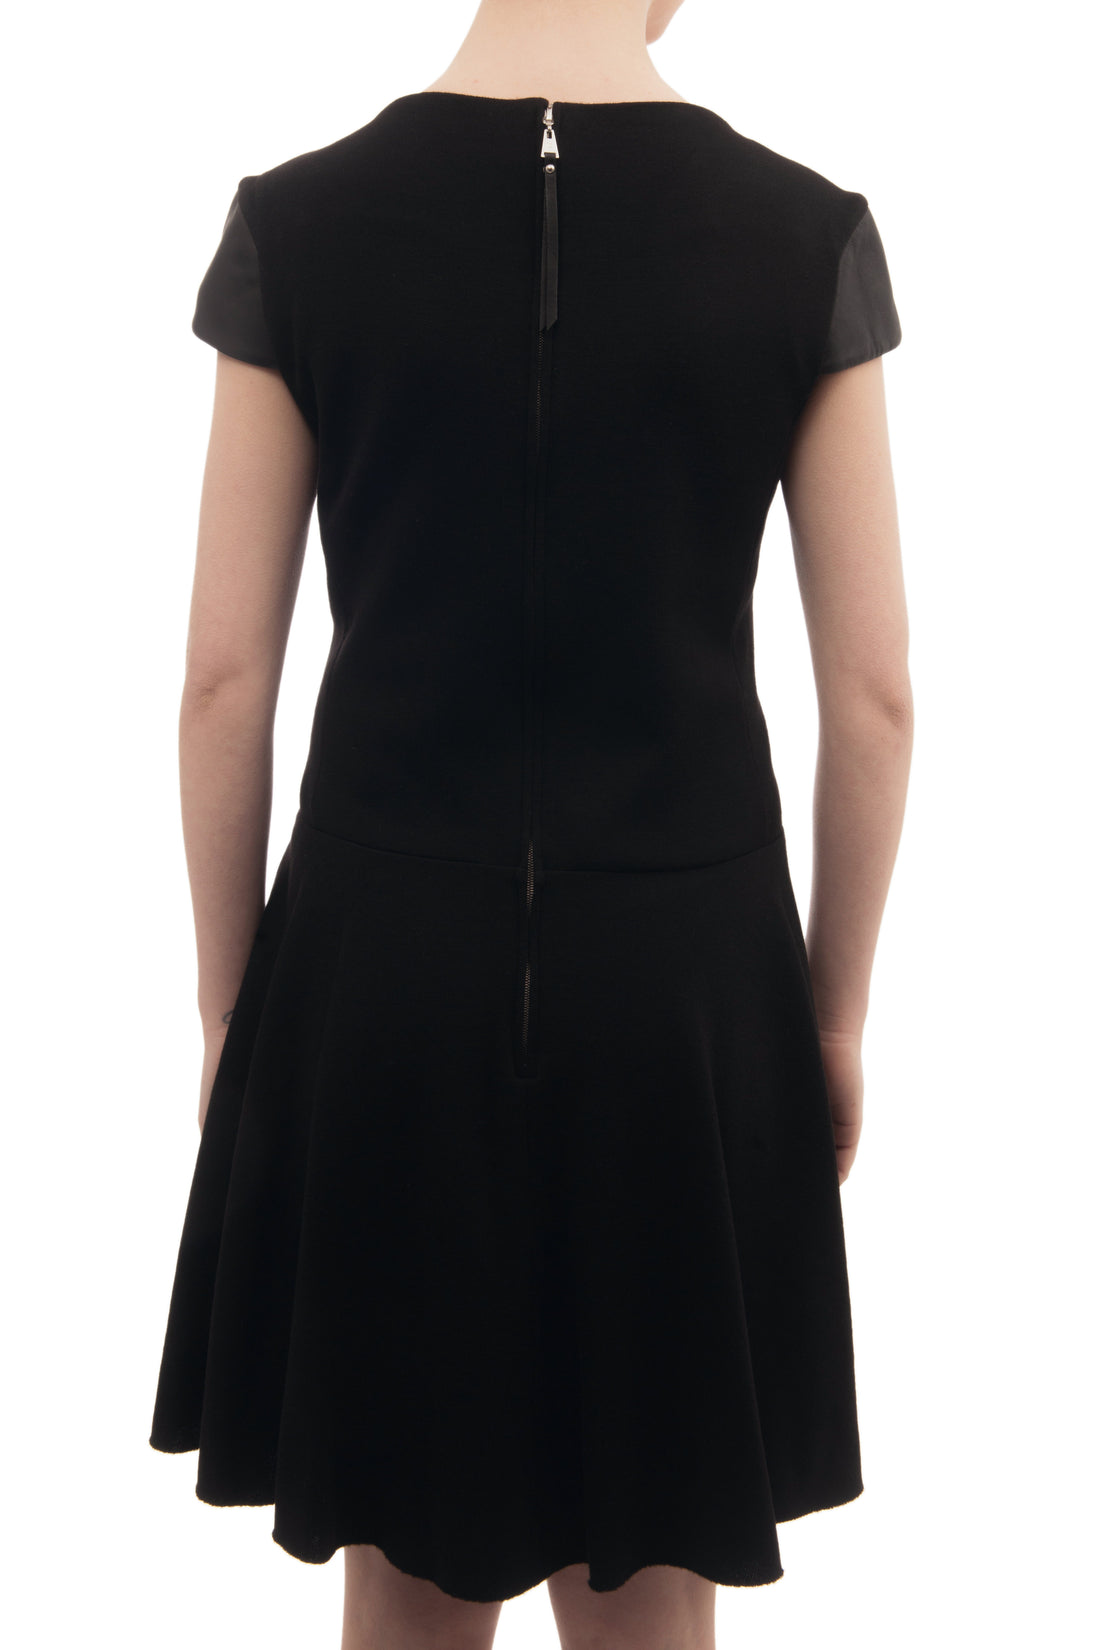 Louis Vuitton Black Wool Knit Jersey Dress with Leather Cap Sleeves – I  MISS YOU VINTAGE